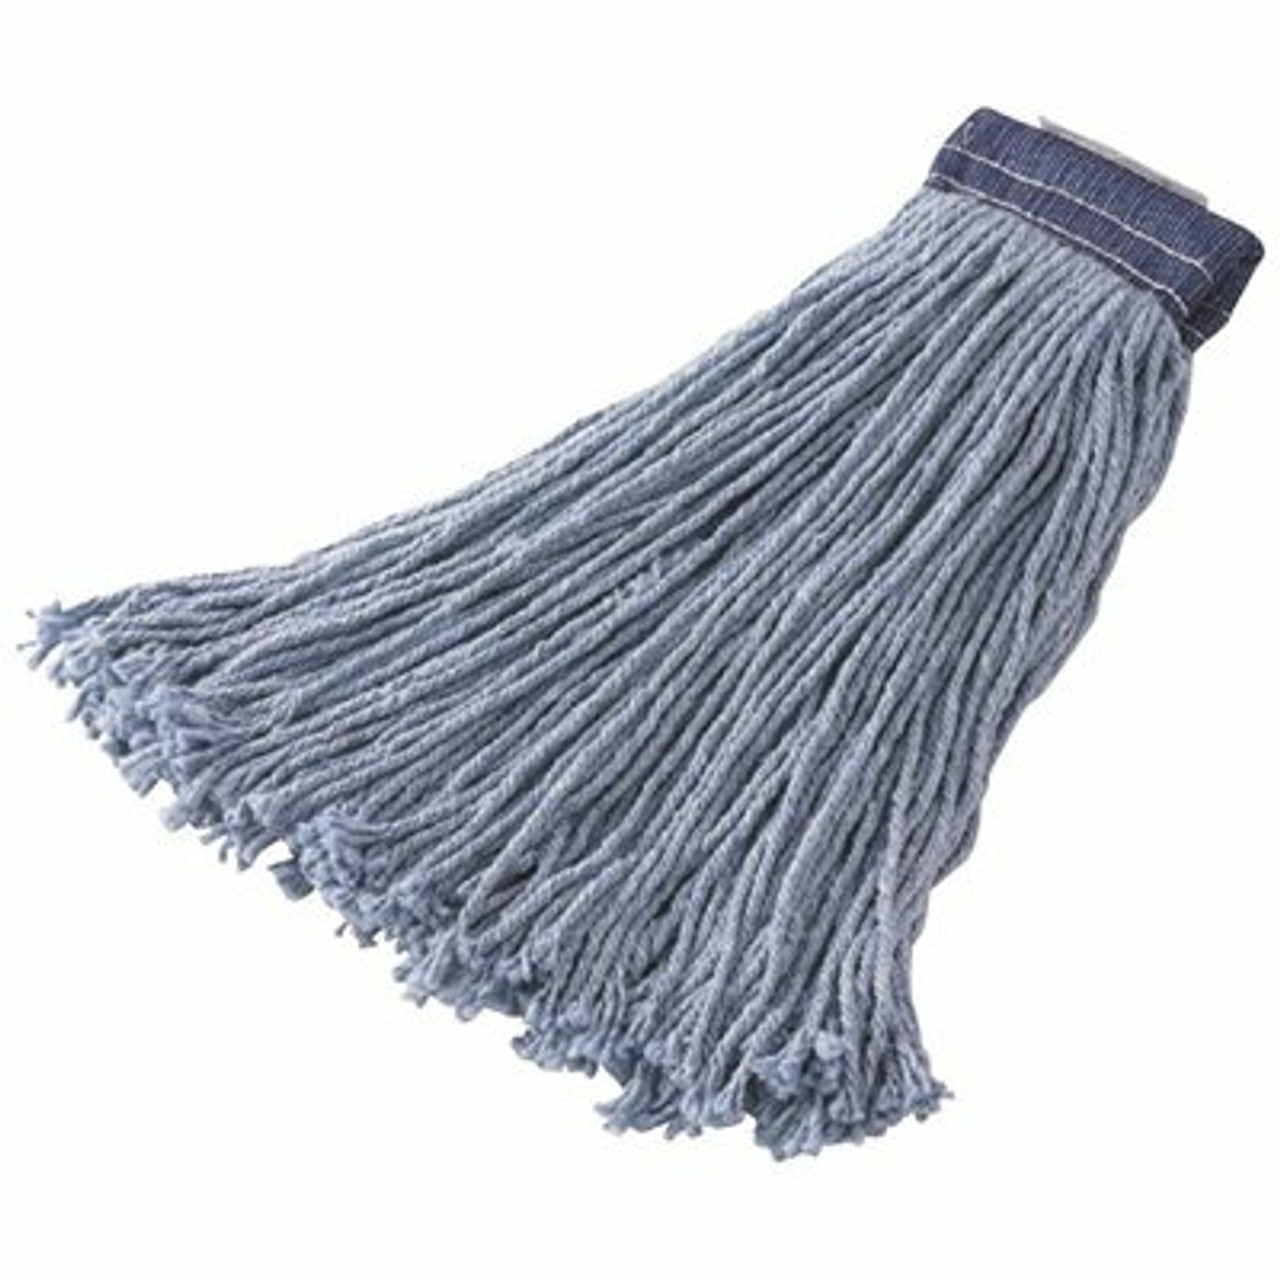 Rubbermaid Commercial Products 16 Oz. Blue Cut-End Cotton/Synthetic Blend Mop Head With 1 In. Head Band